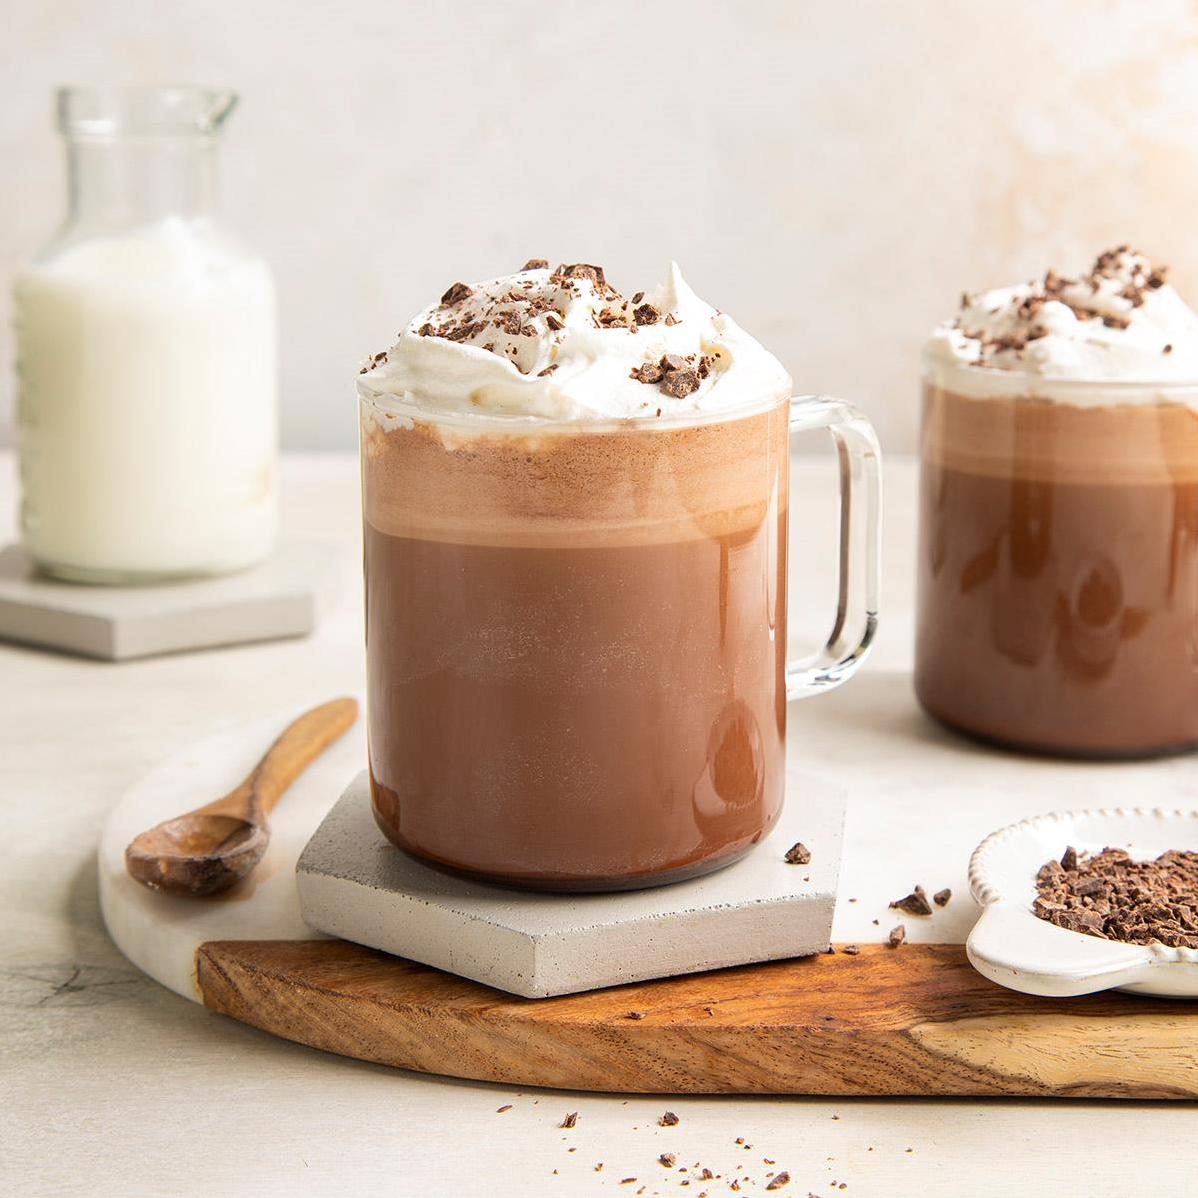  Satisfy your sweet tooth with a decadent Chocolate Coffee!